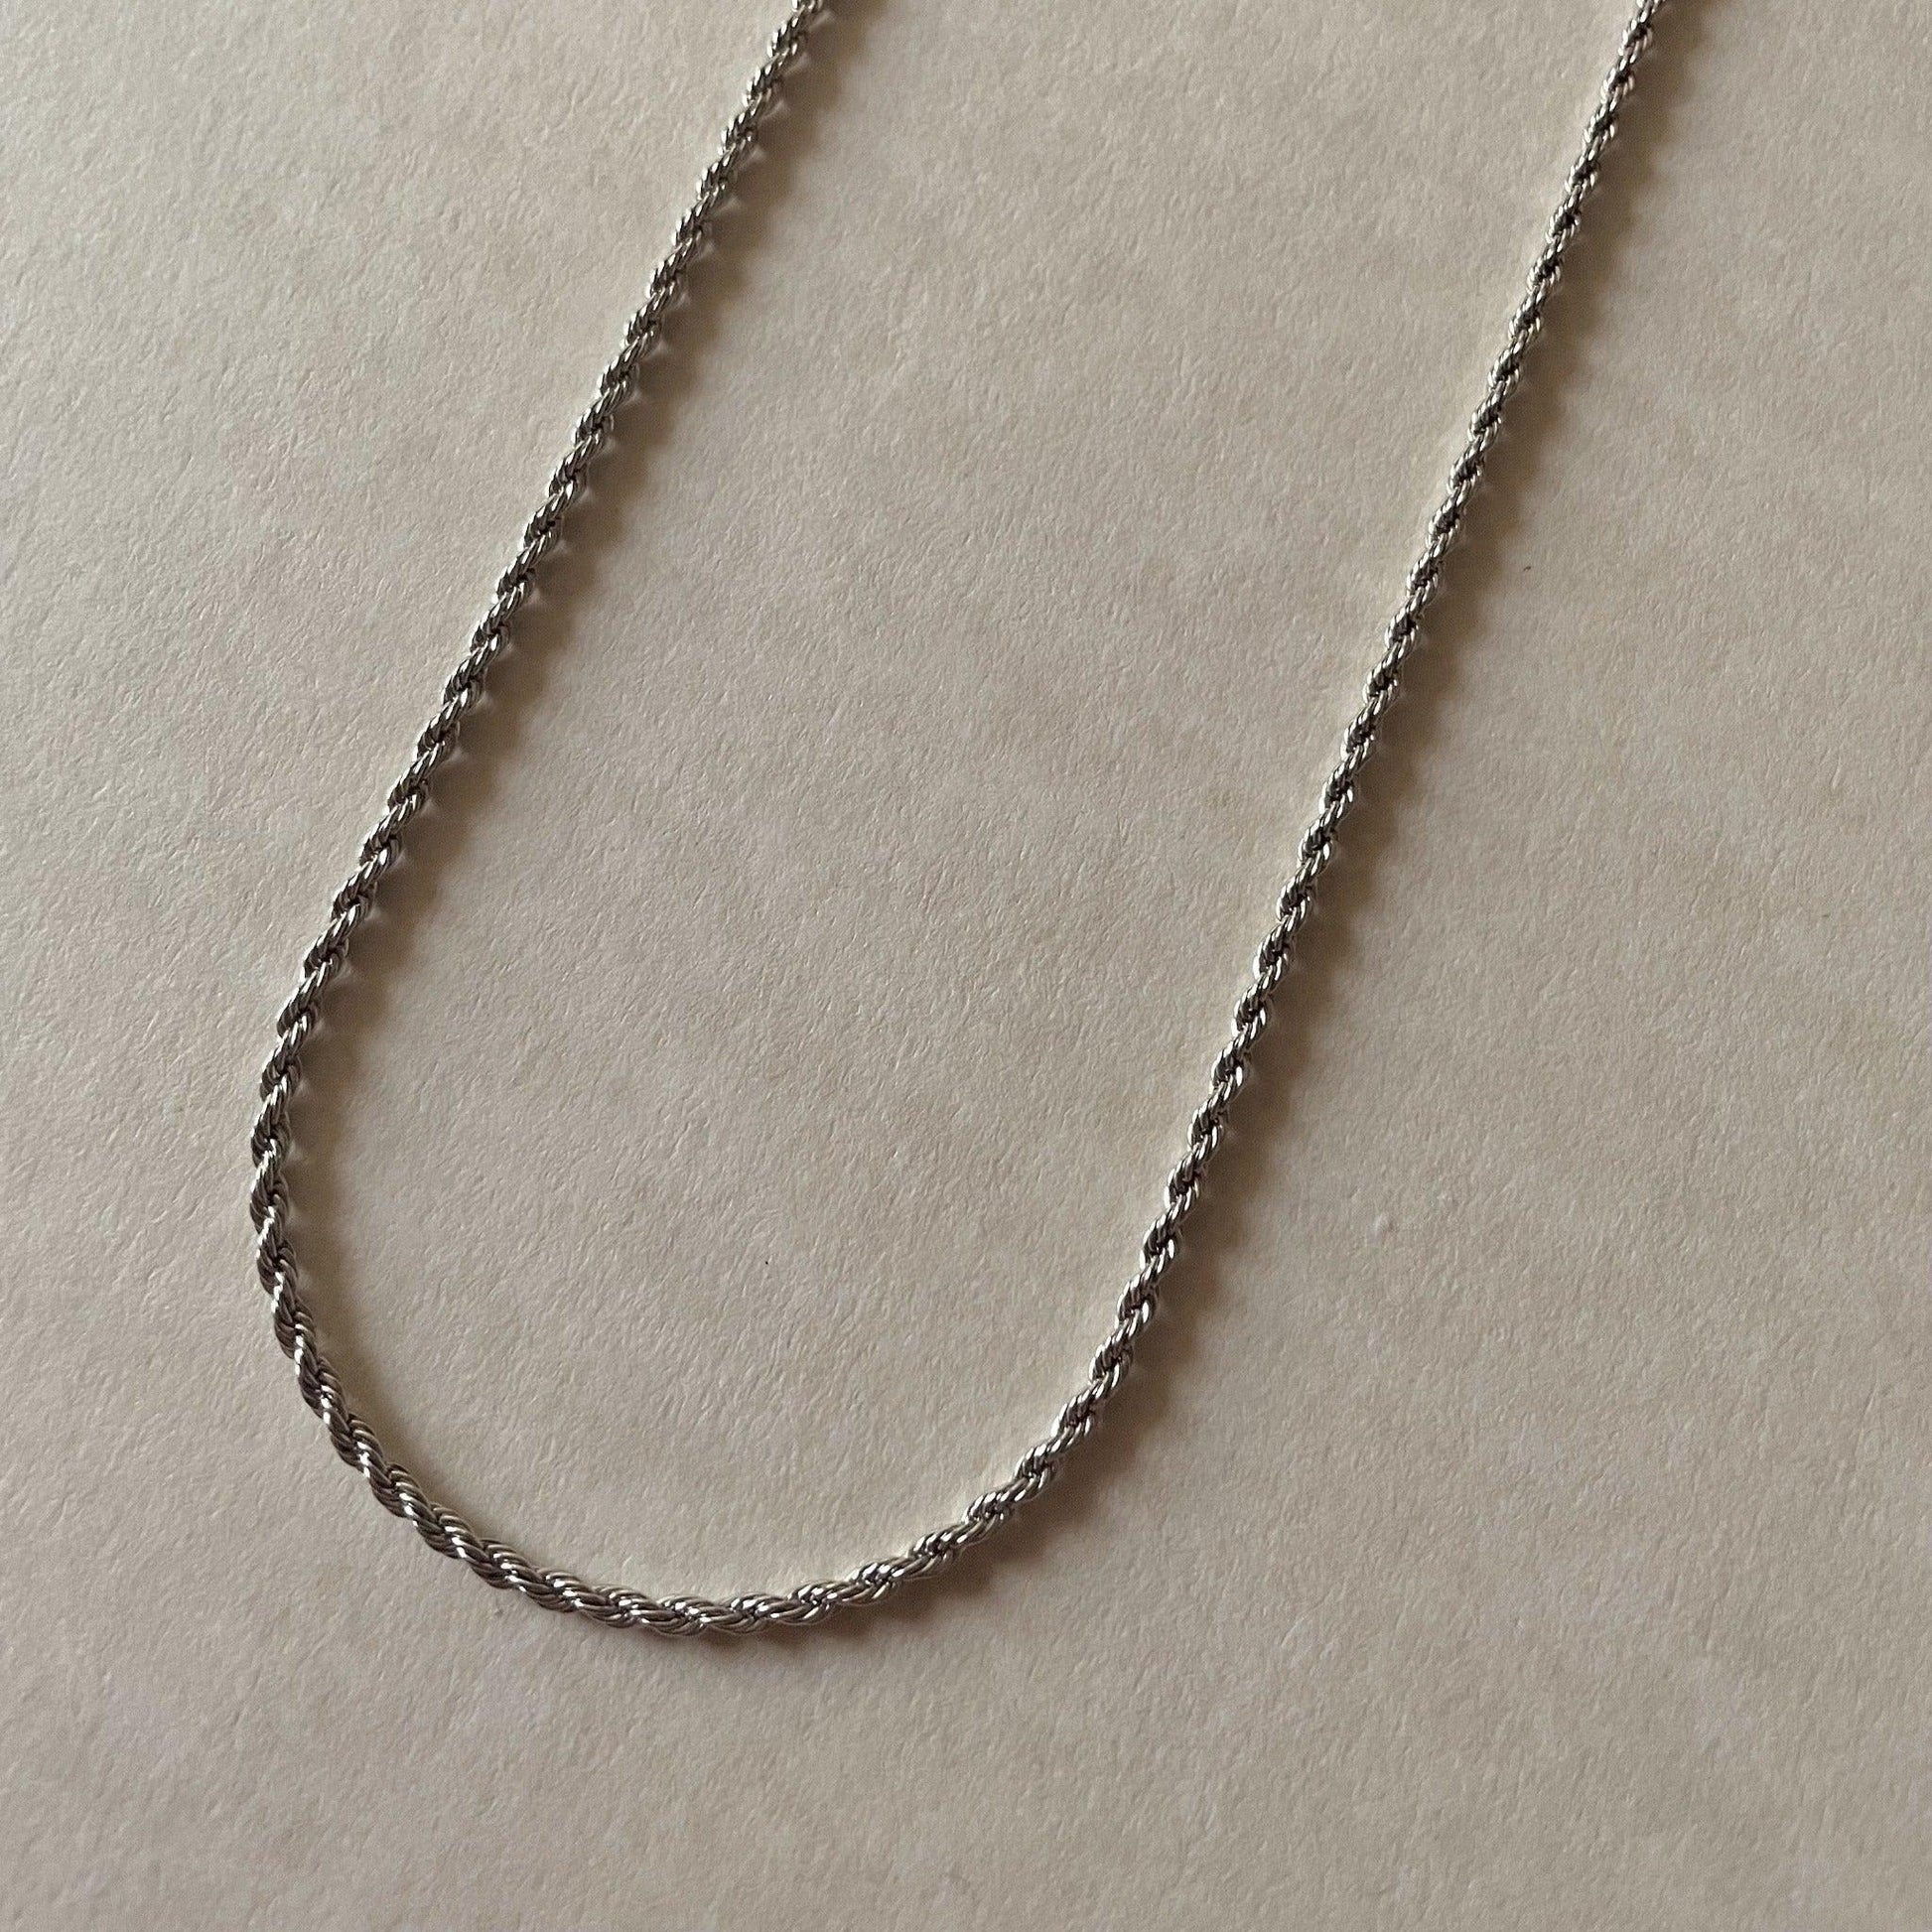 Silver Slim Rope Necklace - The Smart Minimalist